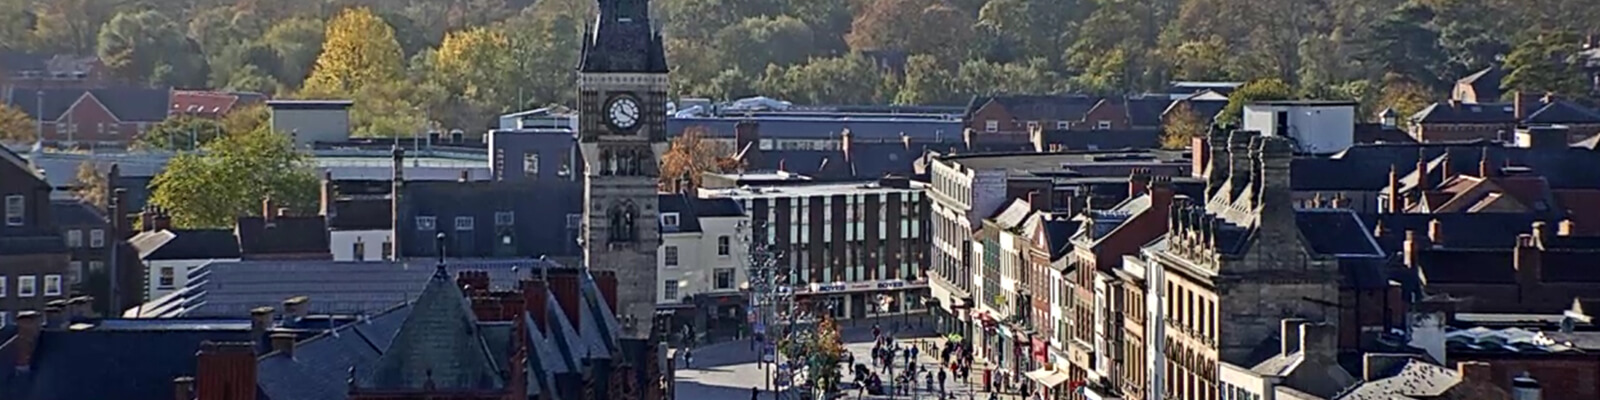 A still from a CCTV camera showing the town clock